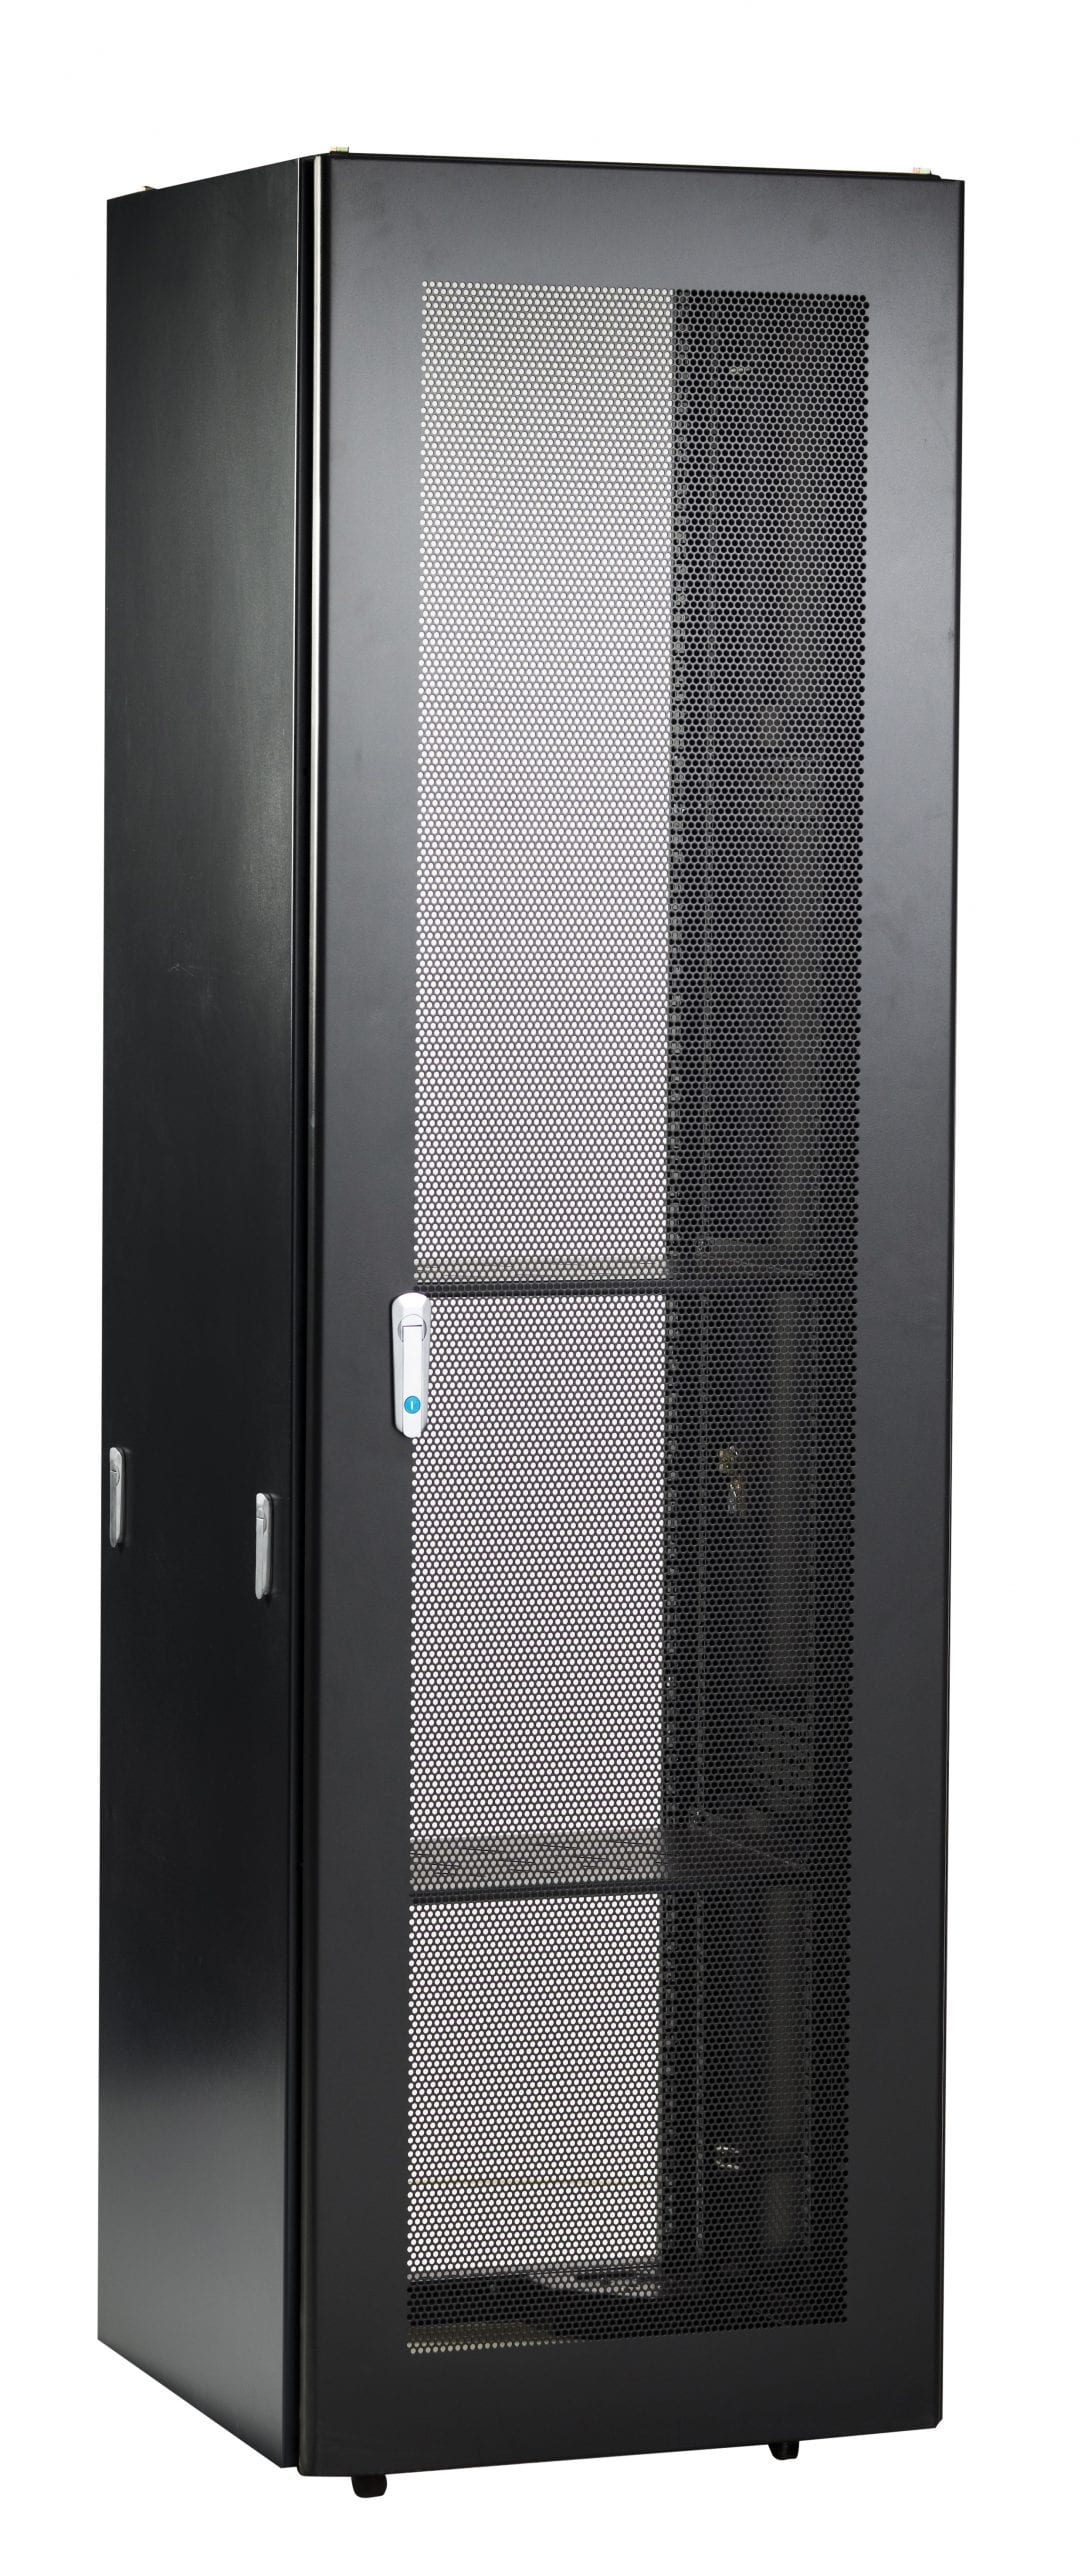 Bud's Server Rack is a cost effective solution to your Server needs